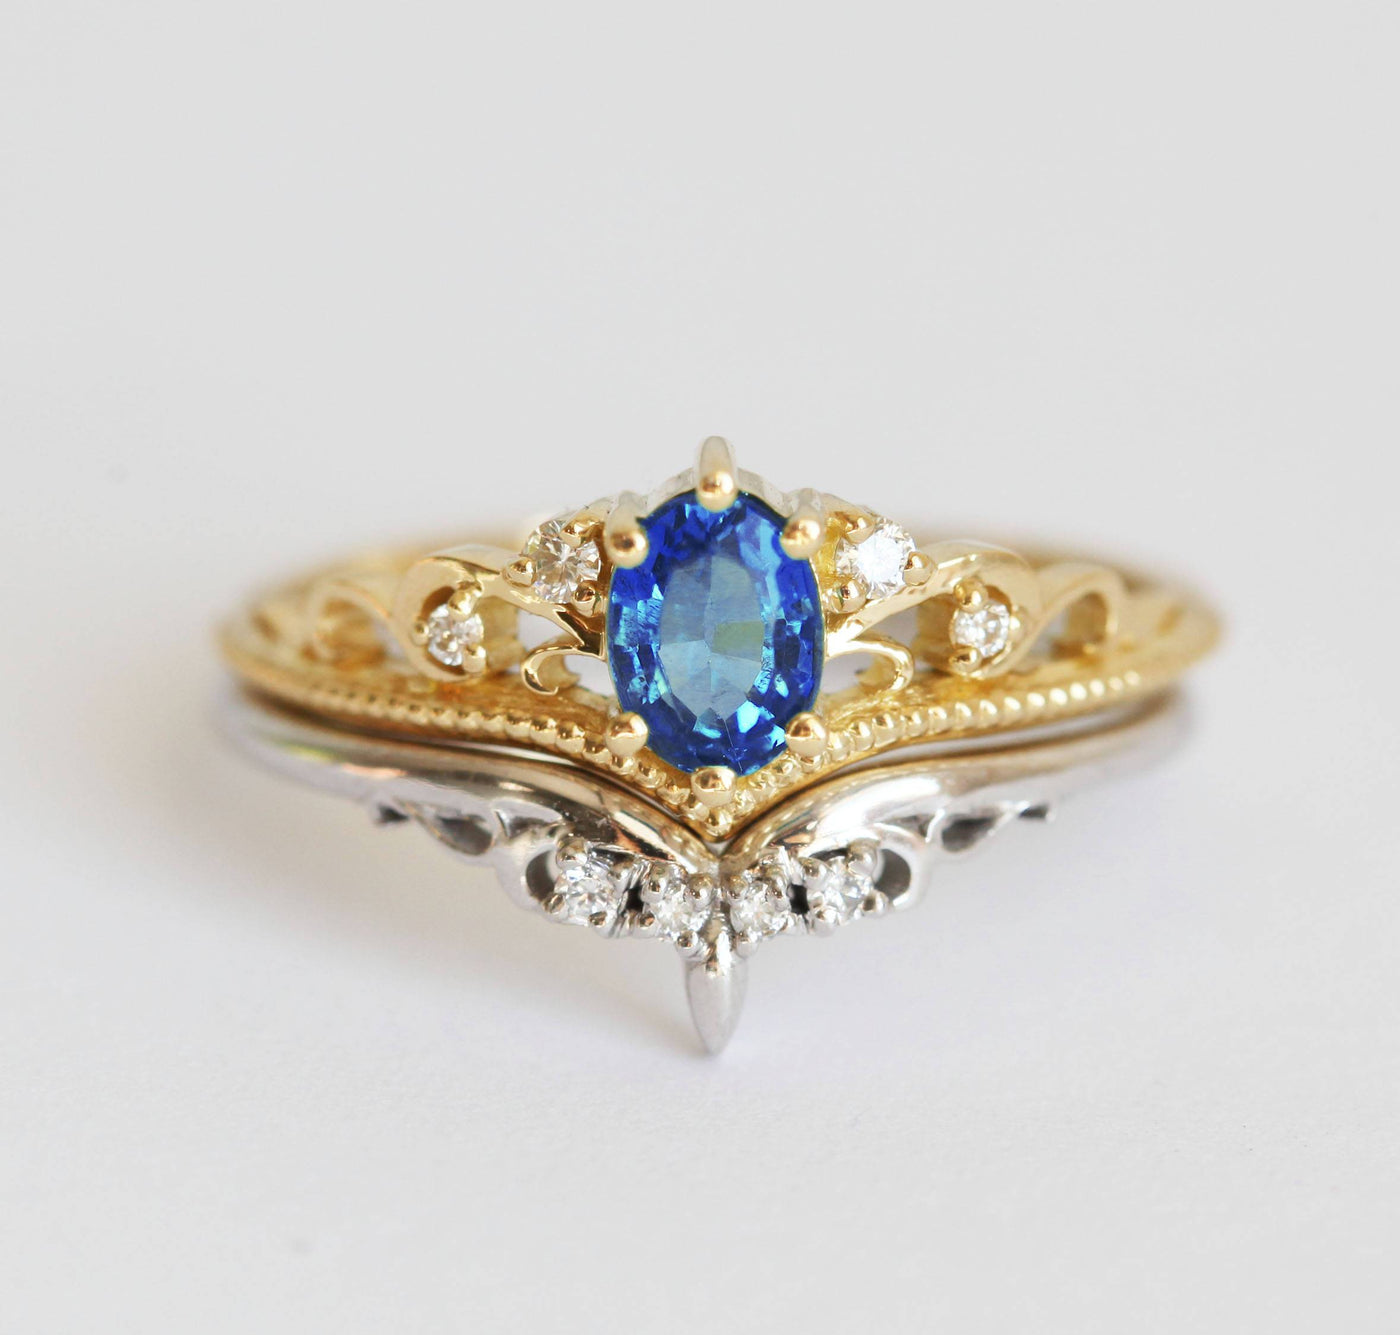 Vintage oval-shaped emerald and sapphire engagement ring